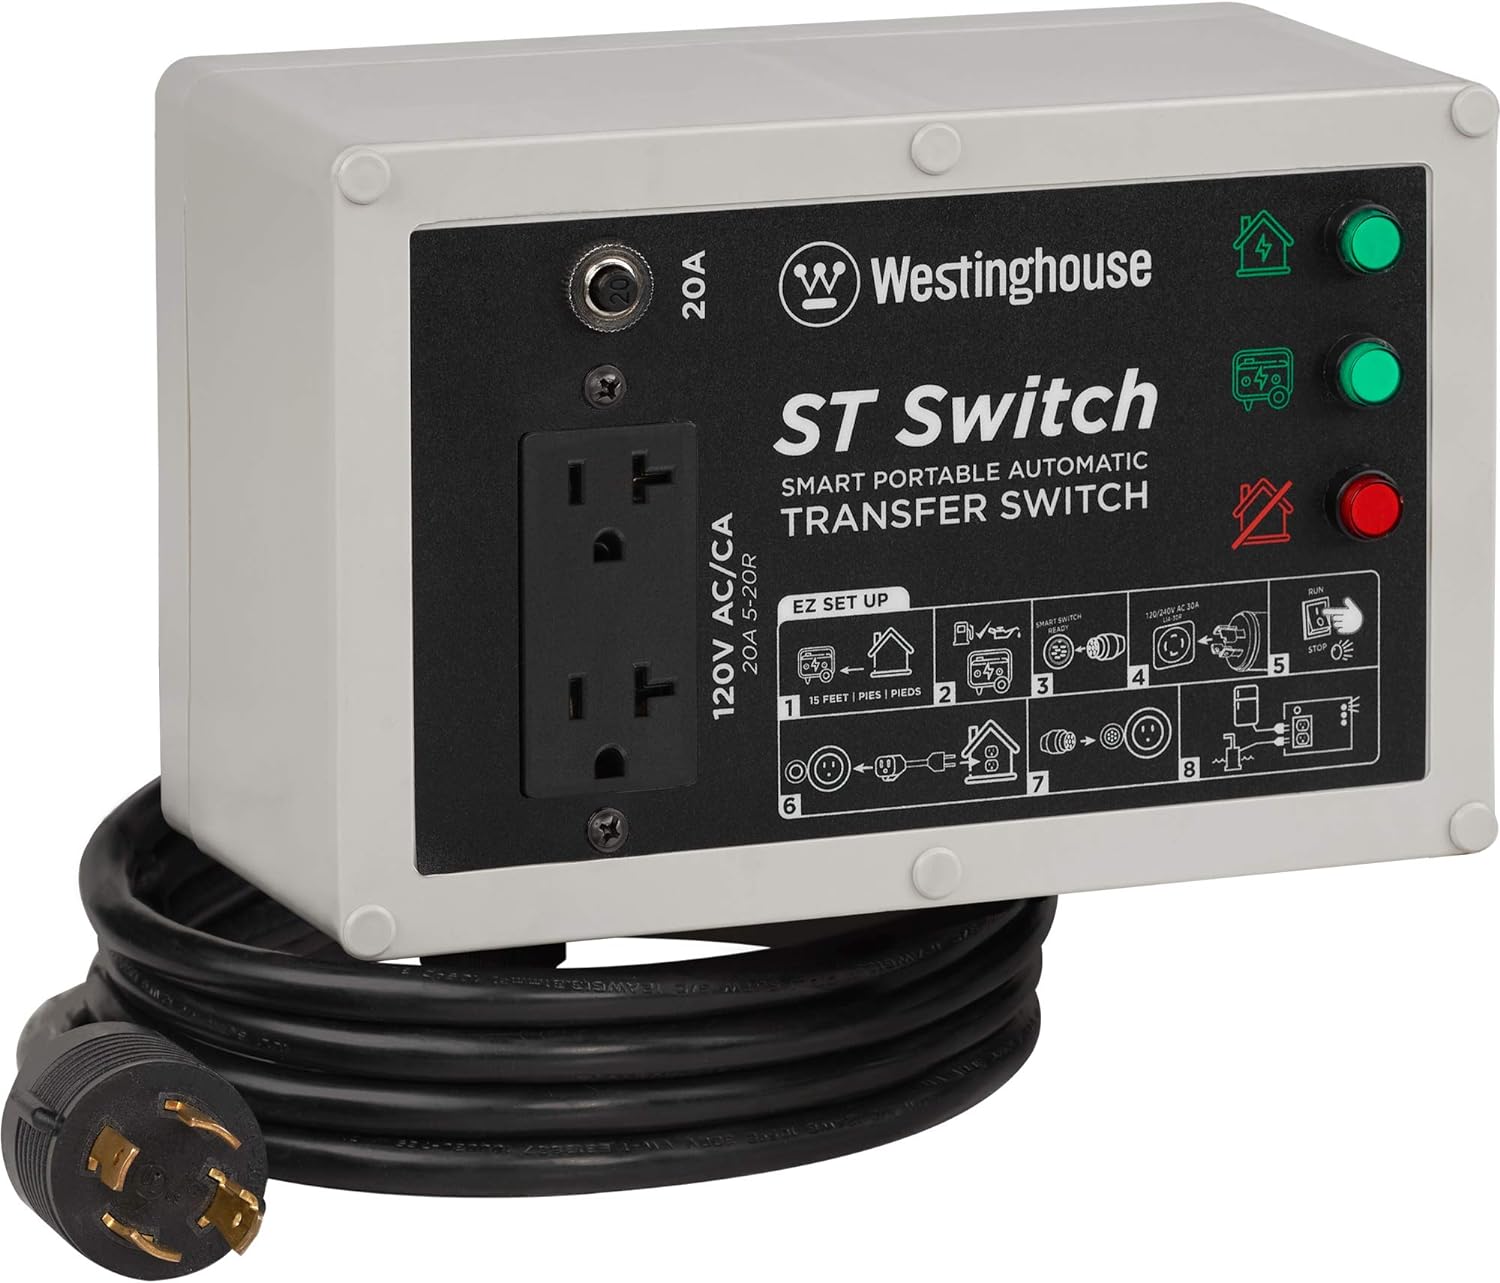 Westinghouse ST Switch Review